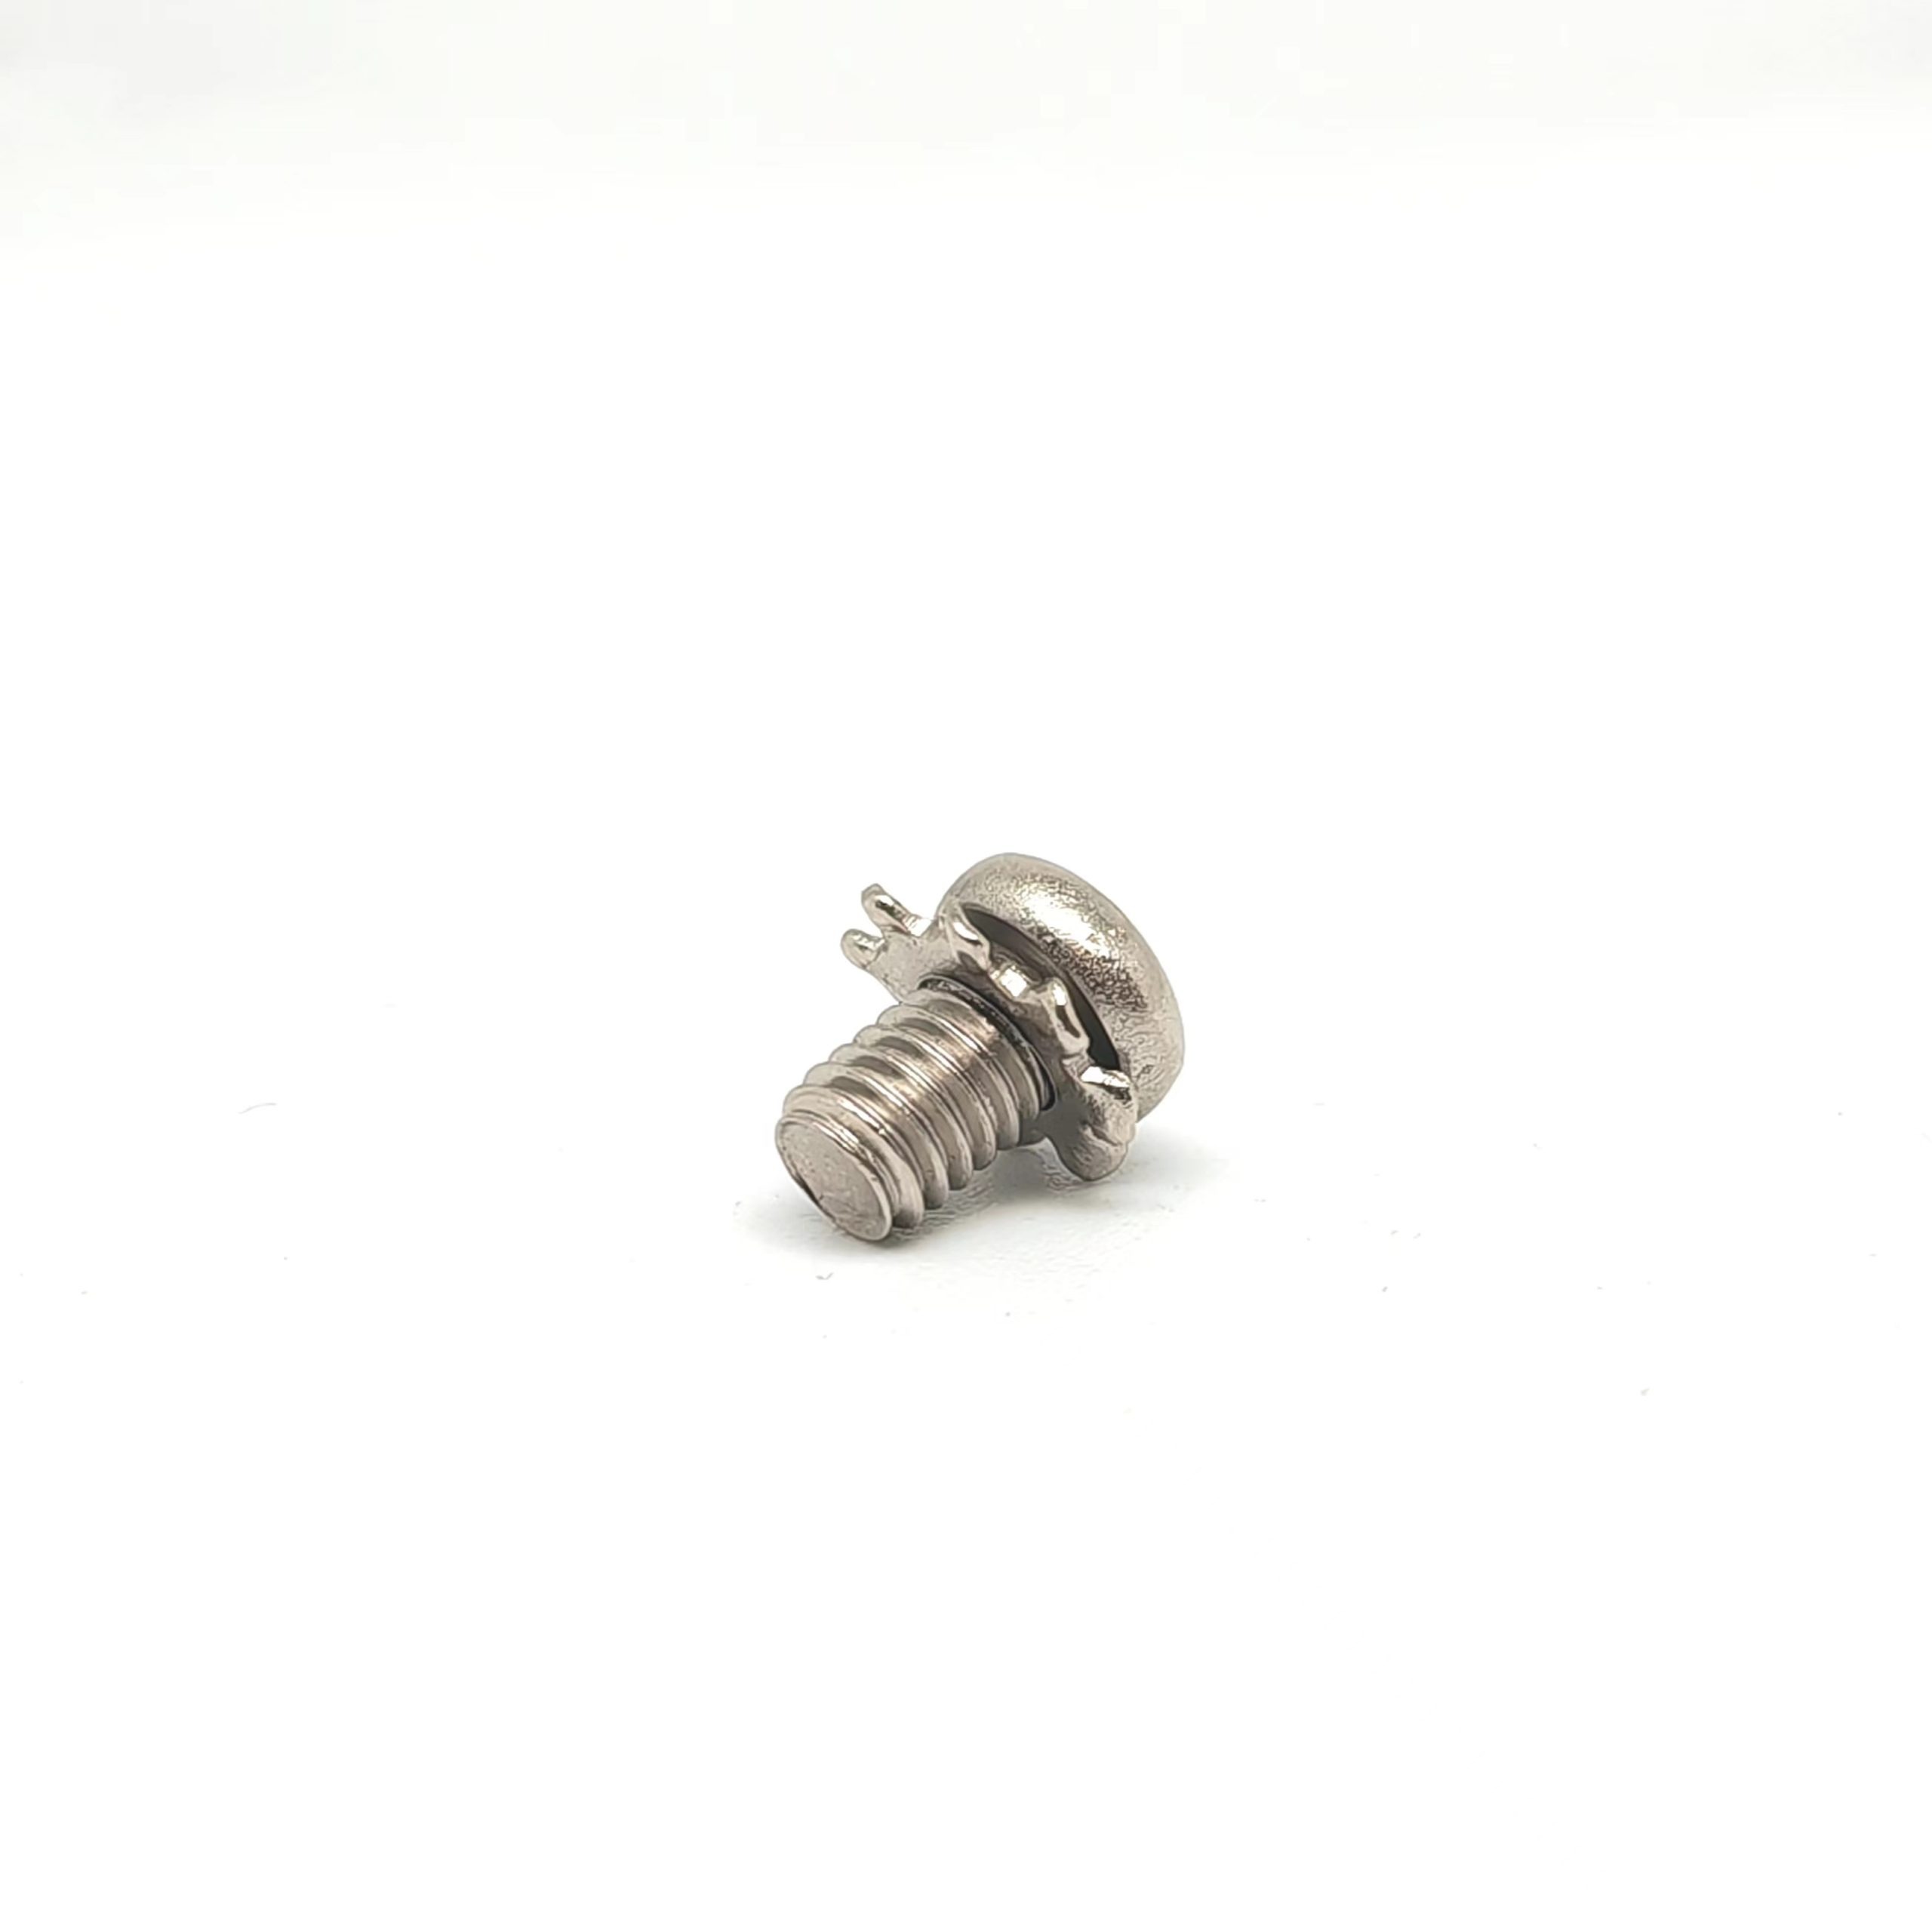 Pan Head Screw with Jagged Washer